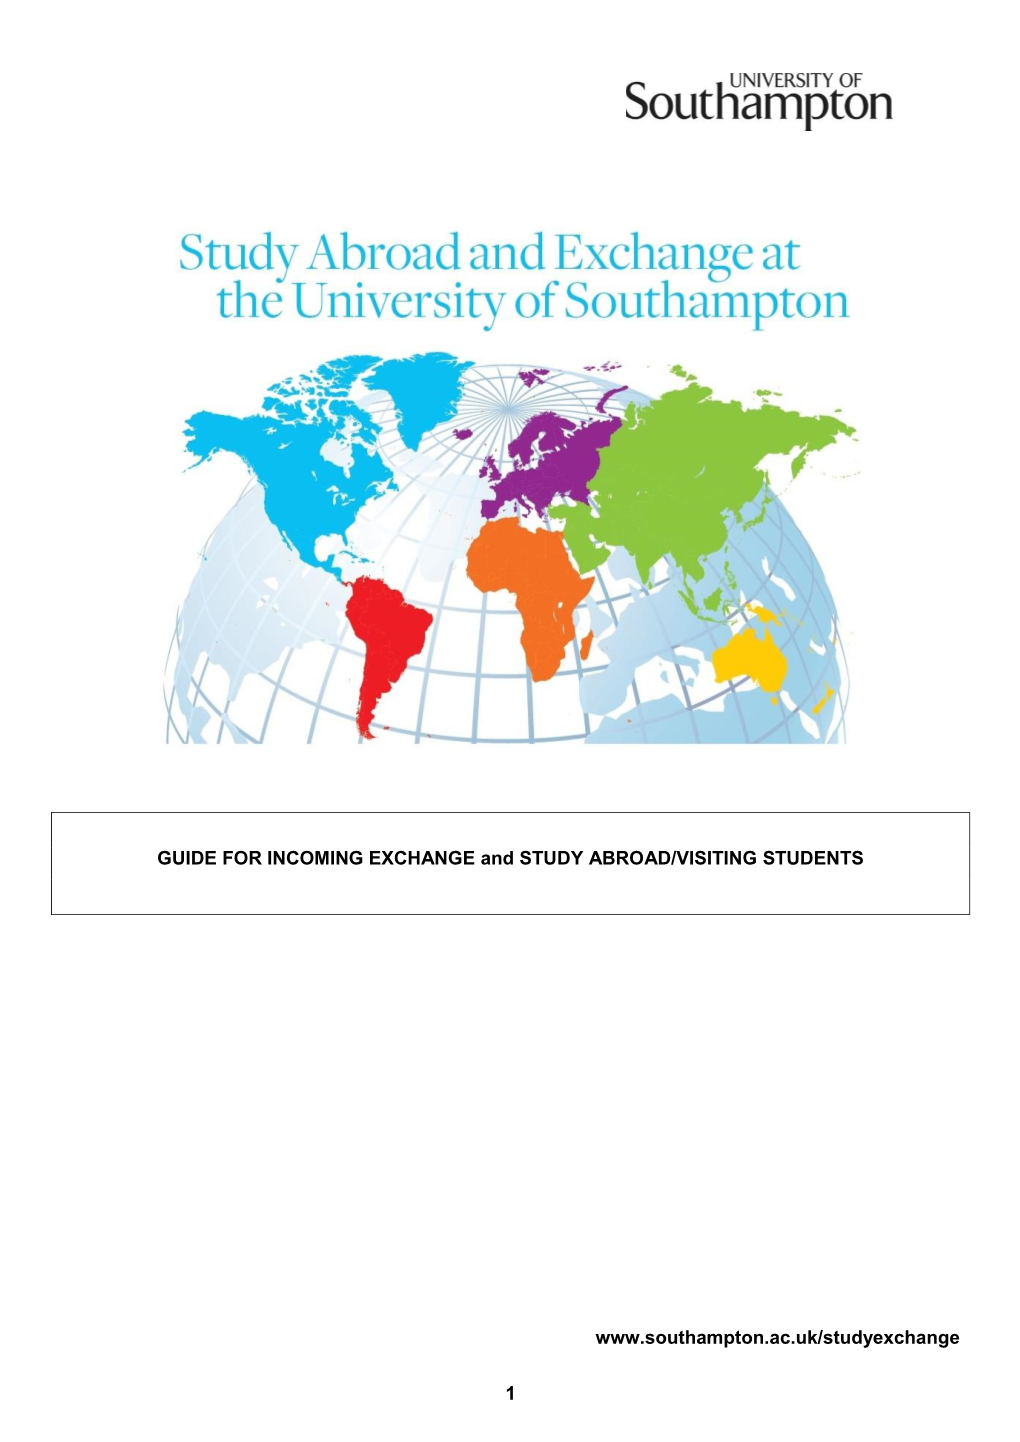 1 GUIDE for INCOMING EXCHANGE and STUDY ABROAD/VISITING STUDENTS